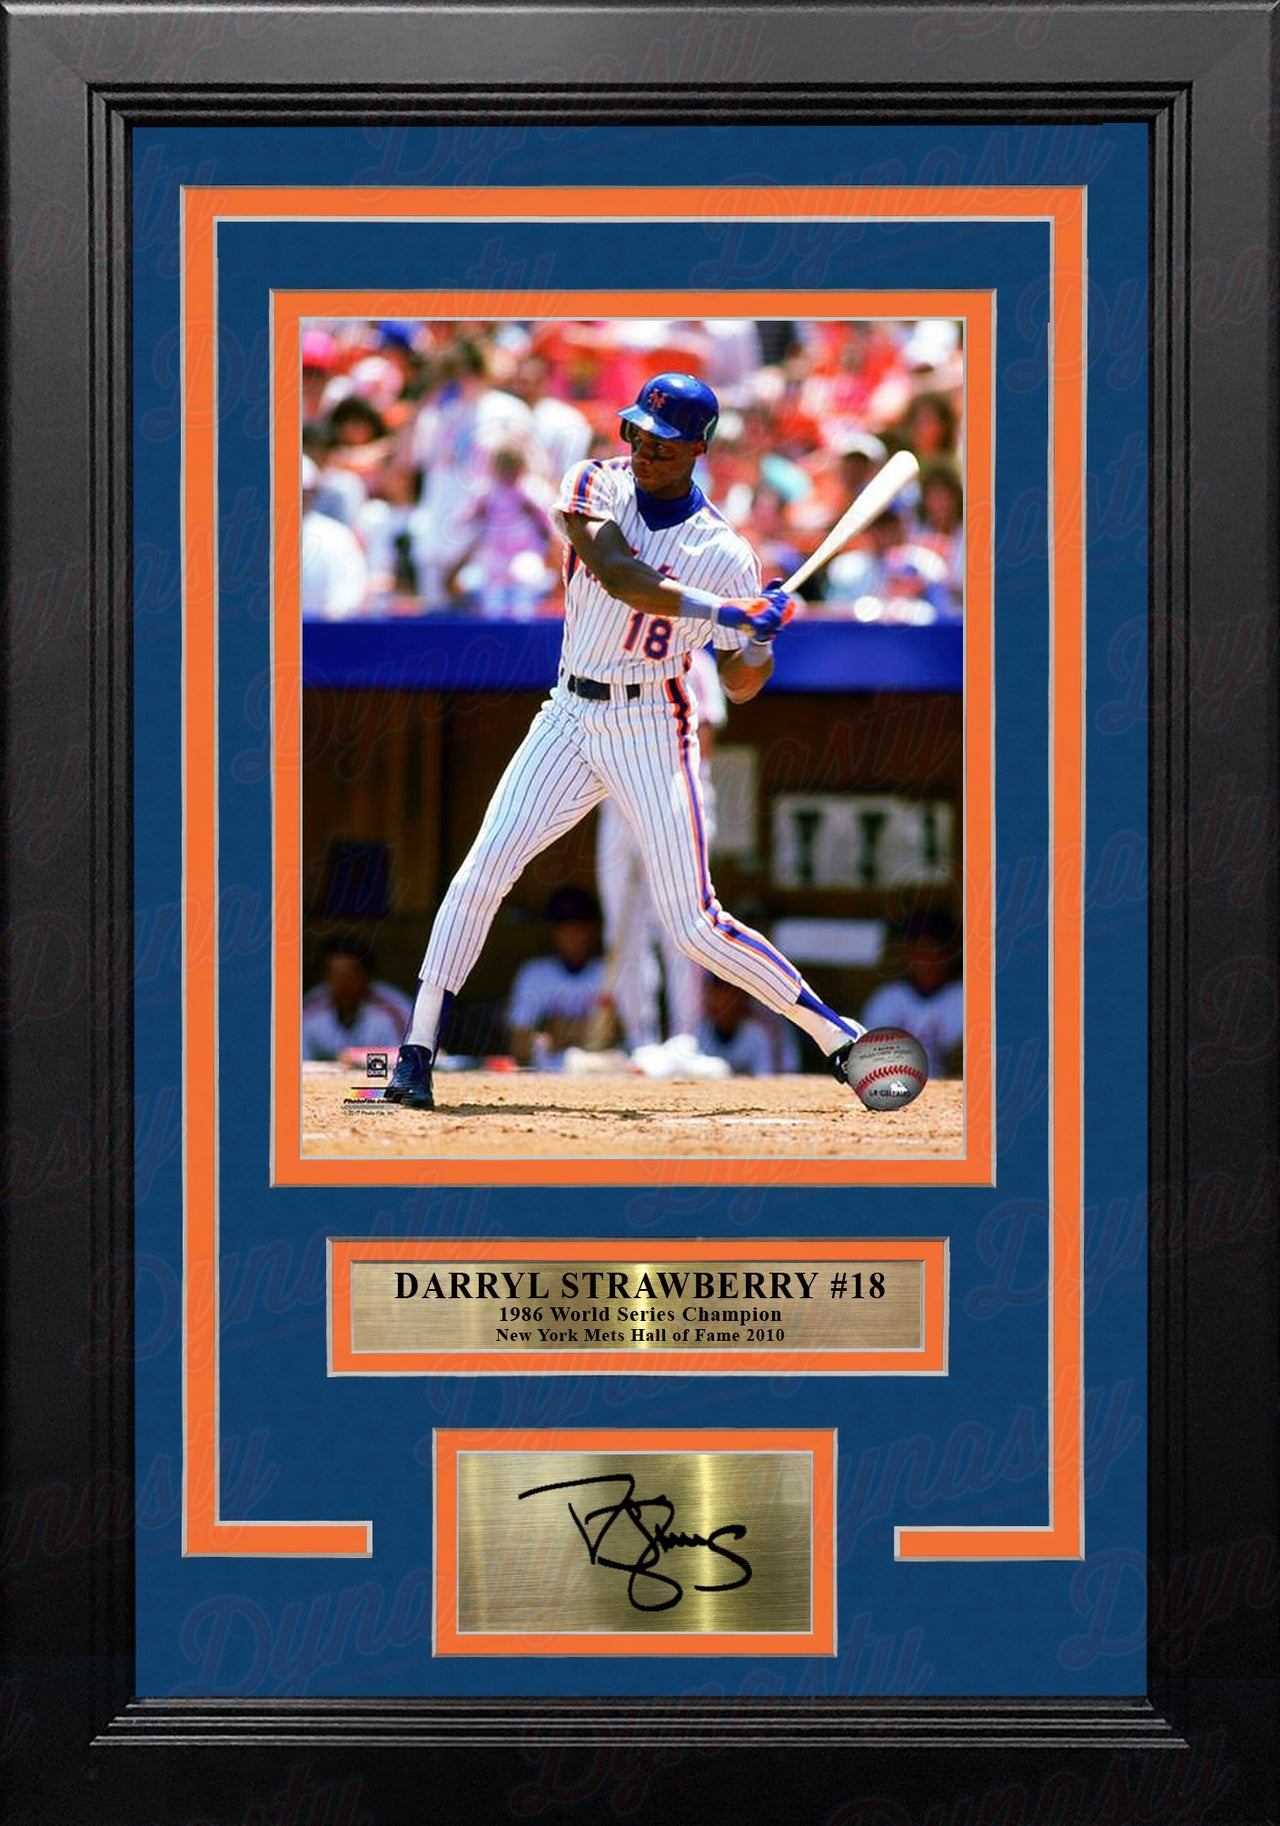 Darryl Strawberry in Action New York Mets 8" x 10" Framed Photo with Engraved Autograph - Dynasty Sports & Framing 